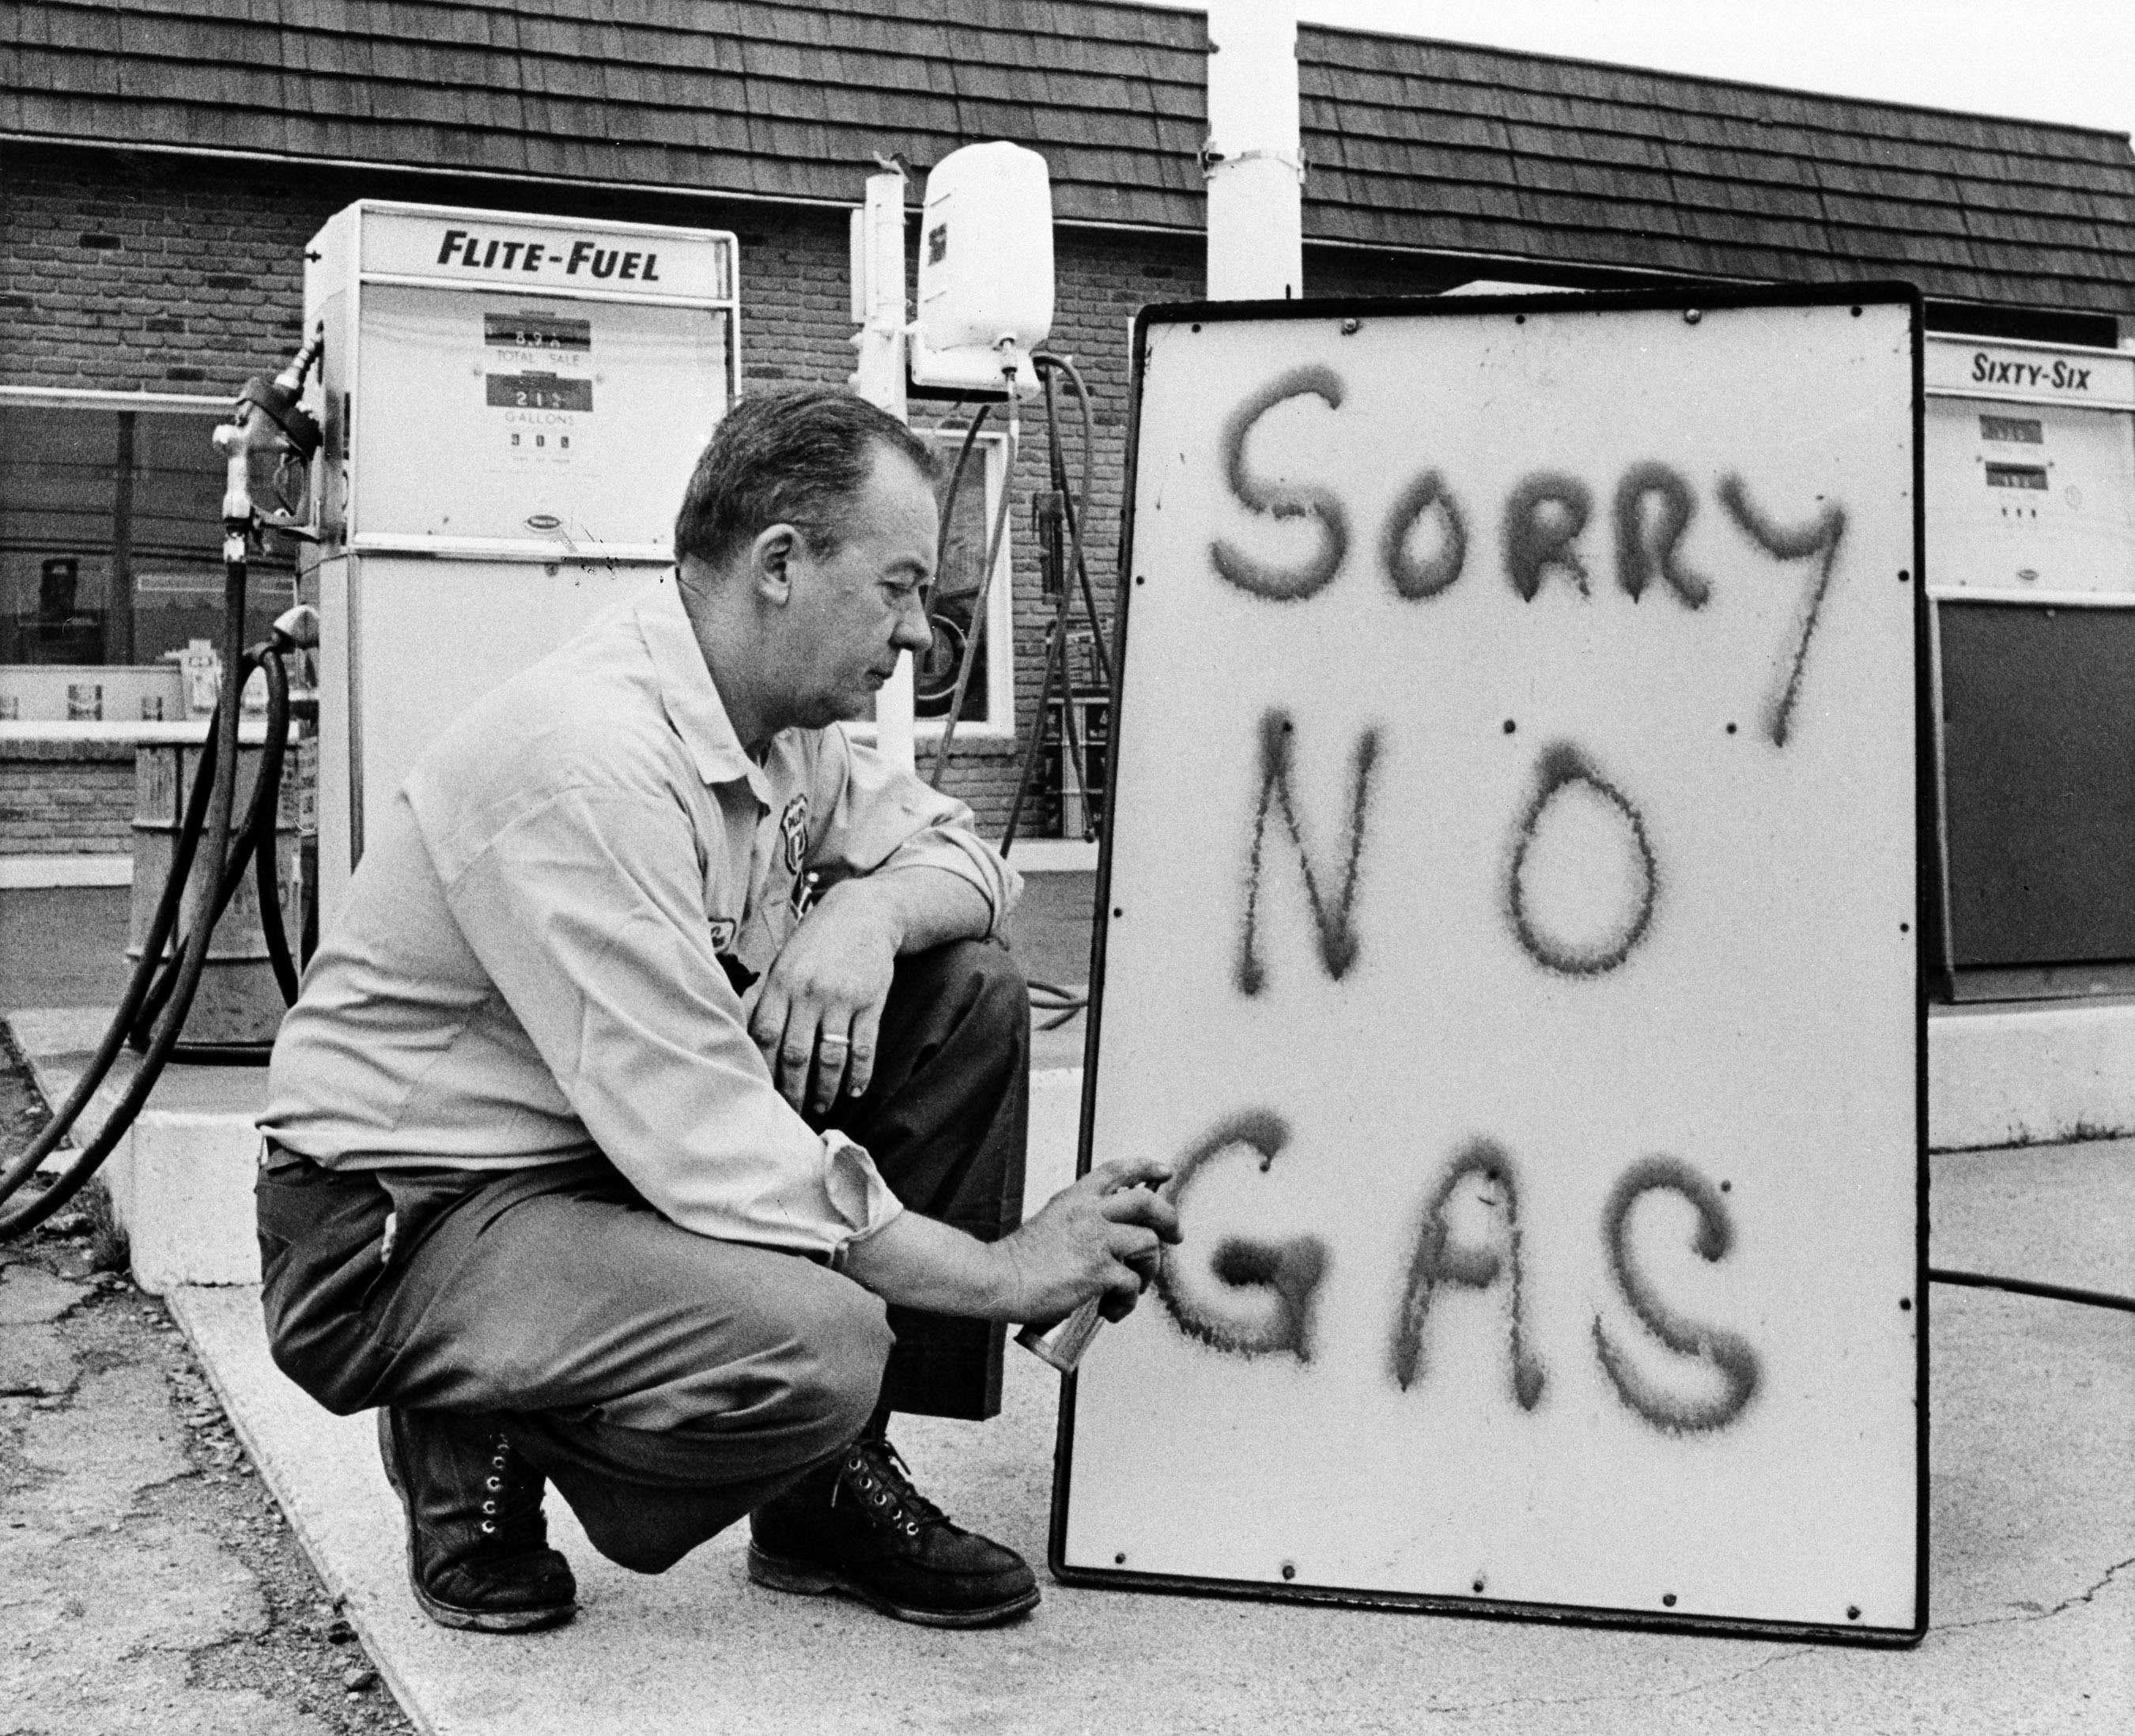 This Gas Crisis Maybe Worse Than The 70's